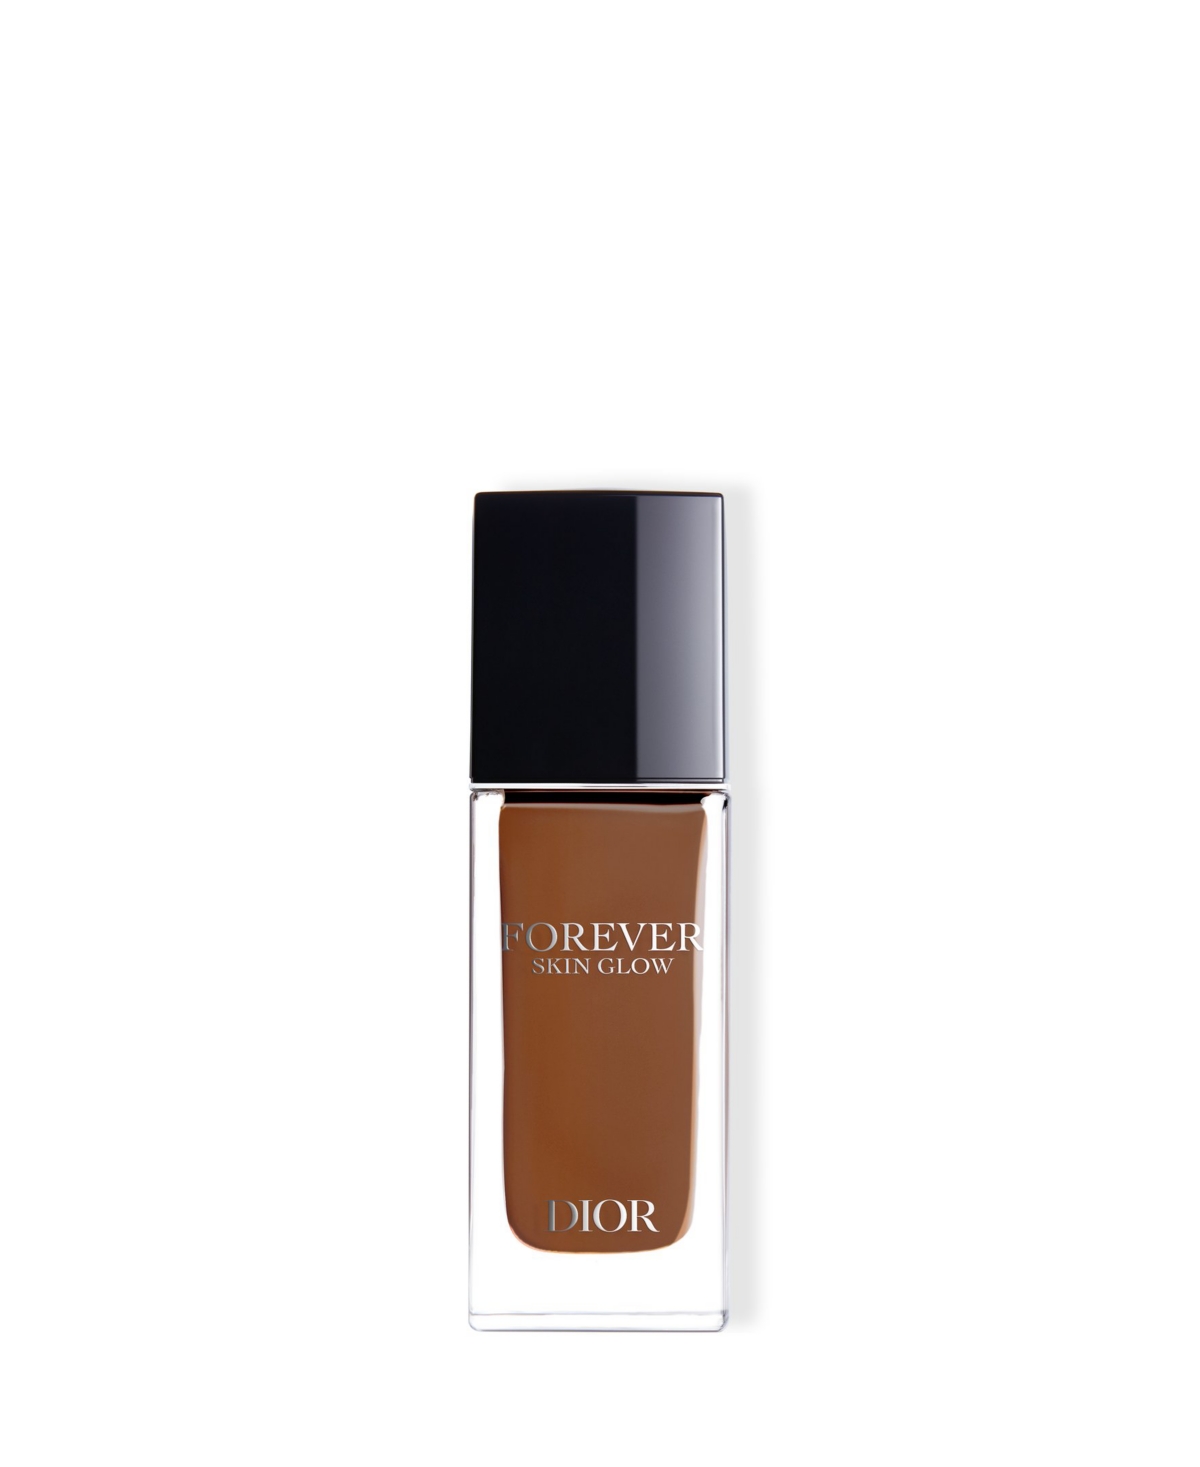 Dior Forever Skin Glow Hydrating Foundation Spf 15 In . Neutral ( Deep Skin With Neutral Under